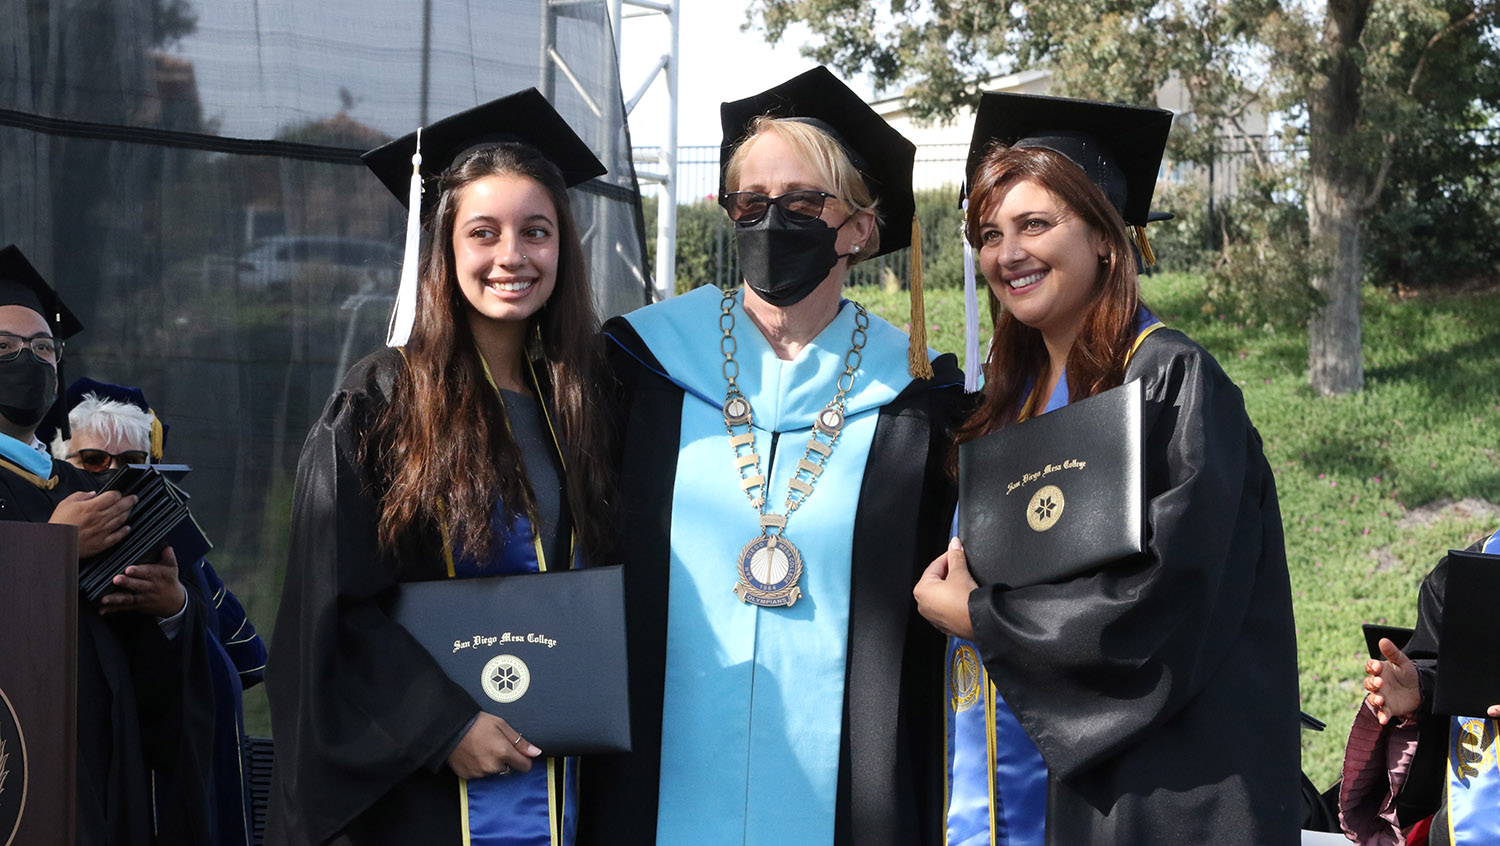 San Diego Mesa College Commencement 2022 Featured Image